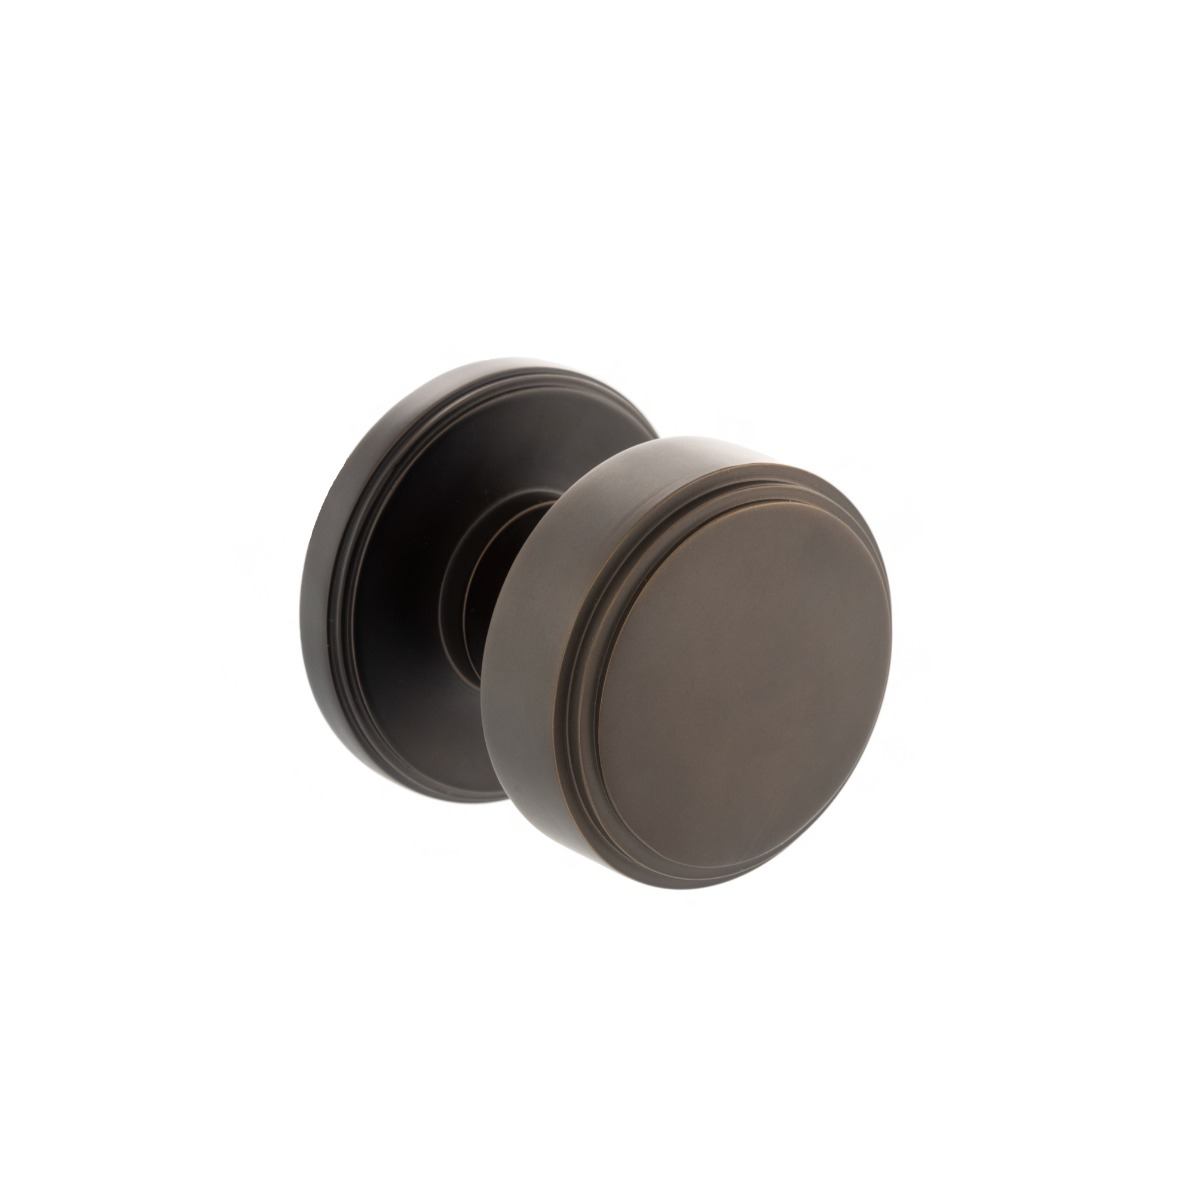 Millhouse Brass Boulton Solid Brass Stepped Mortice Knob on Concealed Fix Rose - Urban Dark Bronze MH350SMKUDB